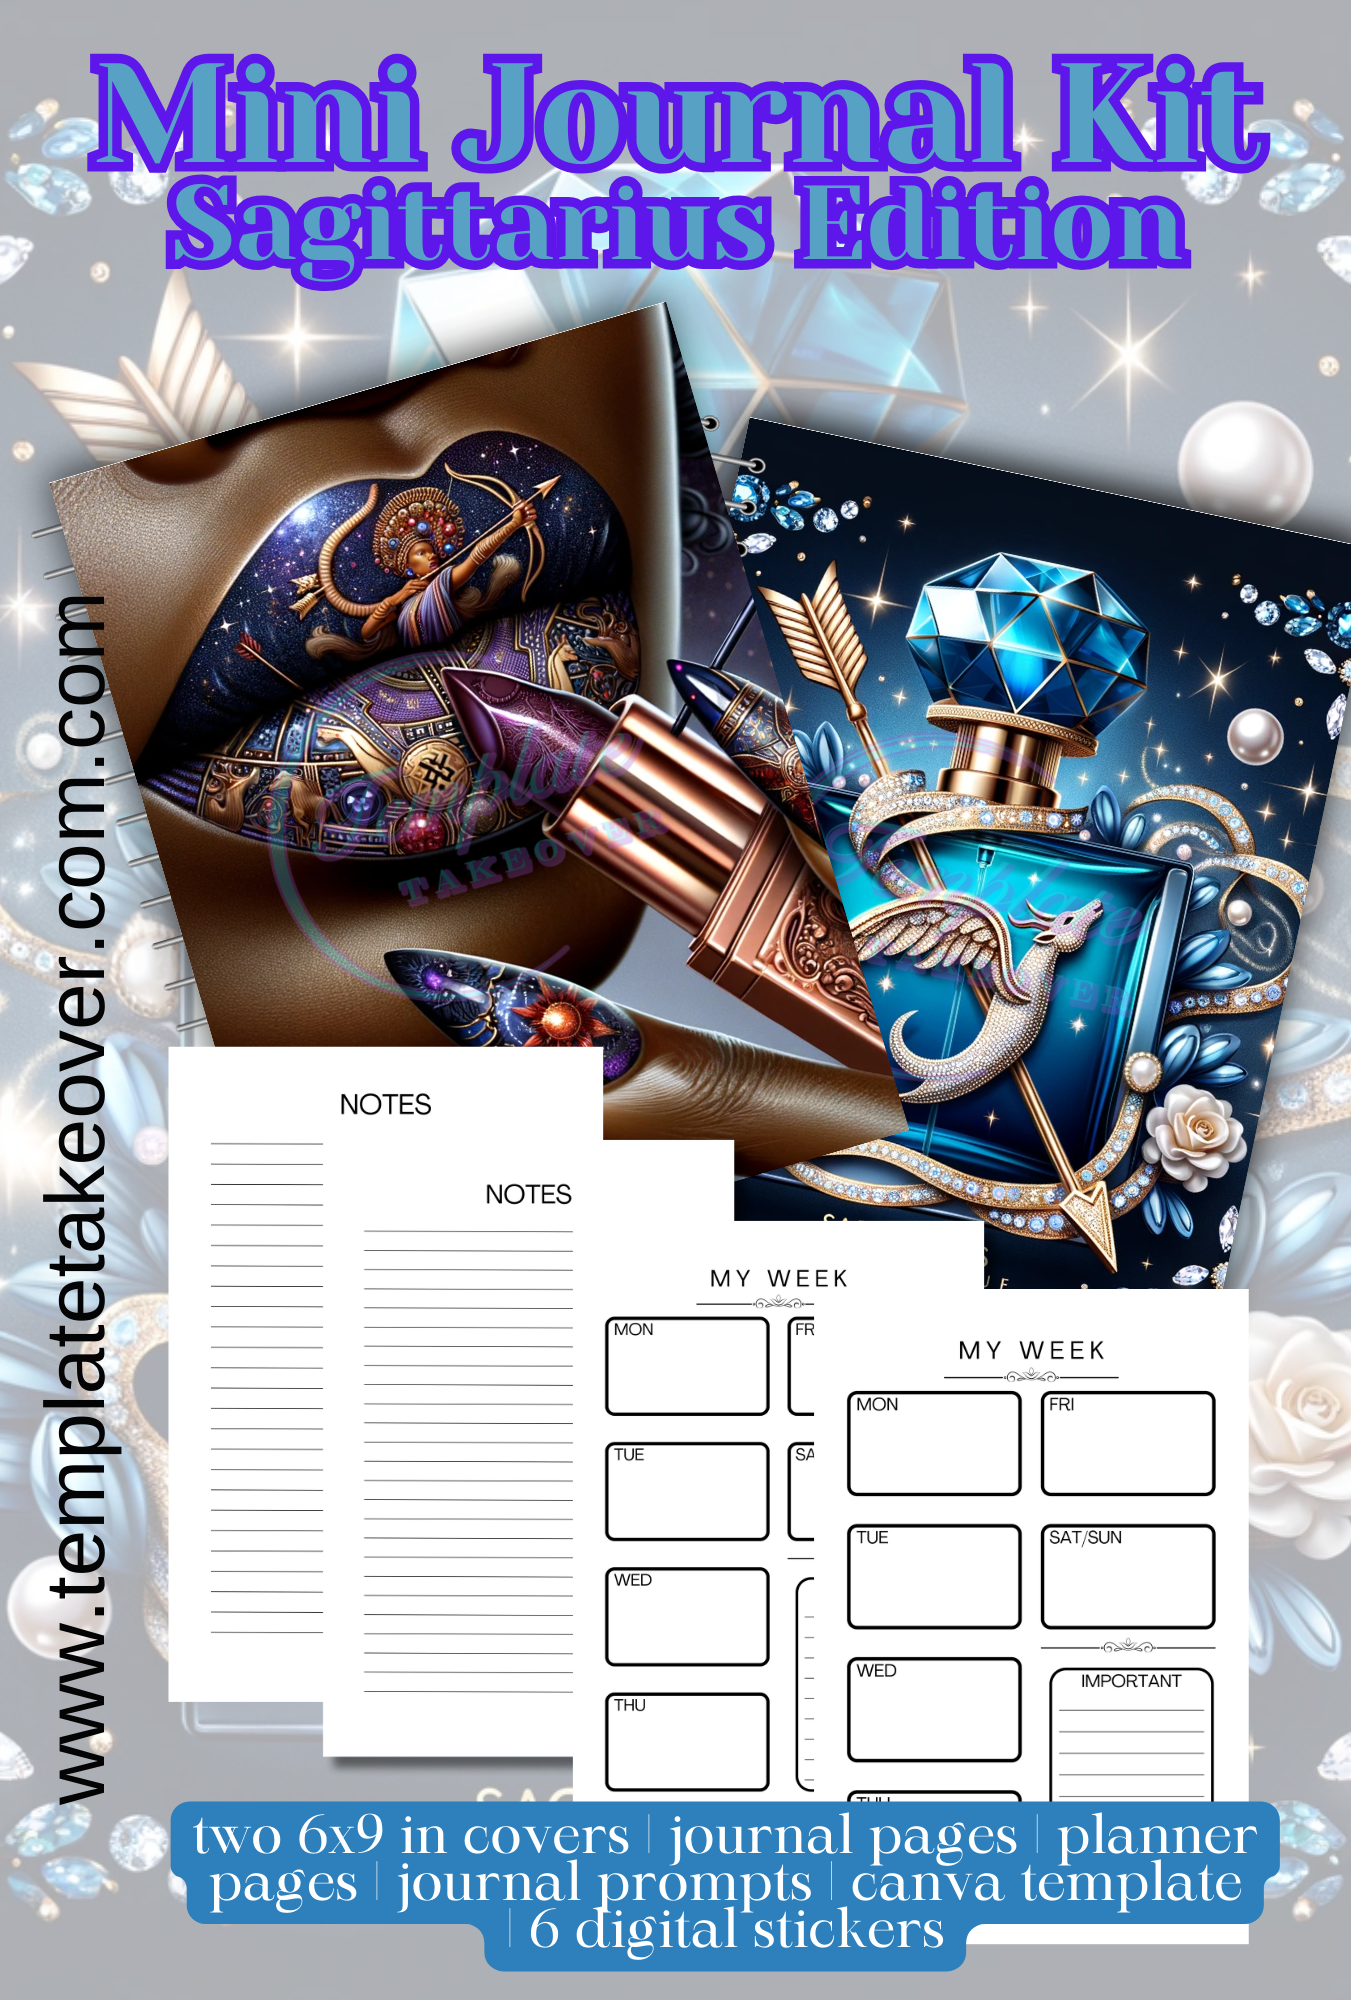 Celestial Scents: Sagittarius Edition Journal: Perfect for Crafters, Creatives, Coaches, and More - Set of 2 Covers, 15 Journal Pages, 5 Planner Pages, 15 Prompts and 6 Digital Stickers. Volume 3